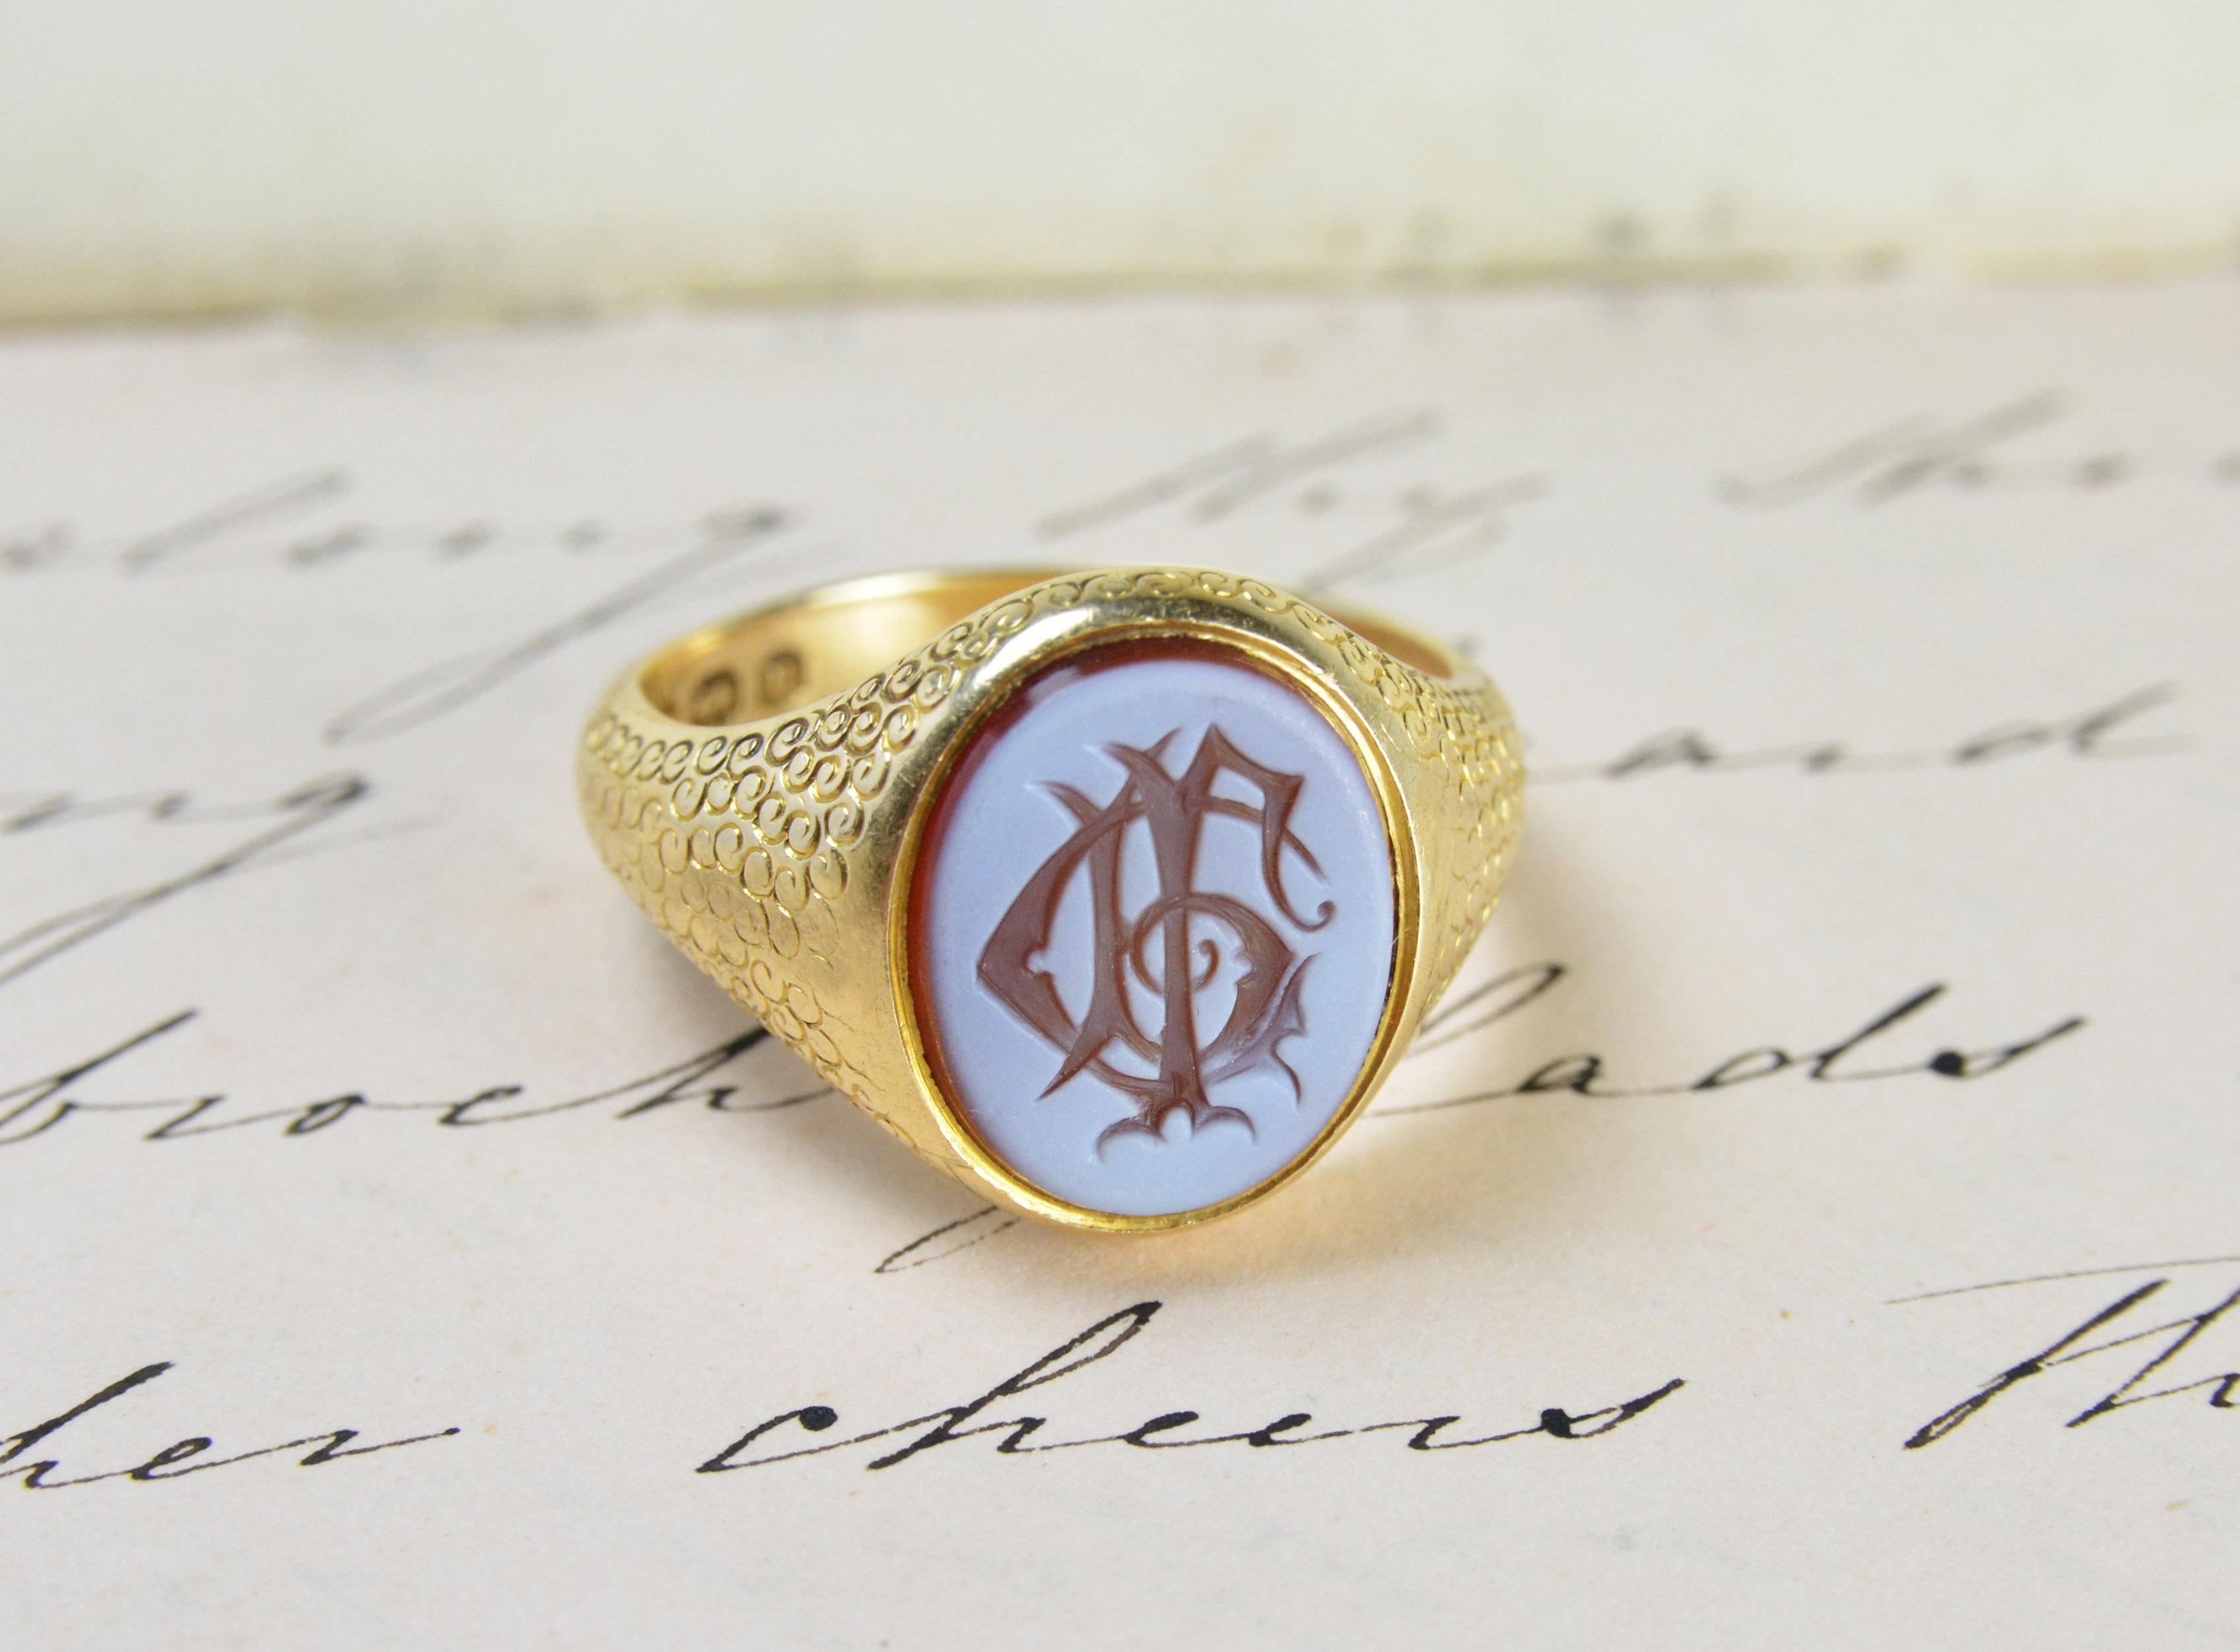 A beautiful example of a red sardonyx Monogram signet ring. The monogram is made up of the letters G R L. The red Sardonyx stone consist of two different coloured strata the top white layer is engraved to reveal the colour underneath.

The ring